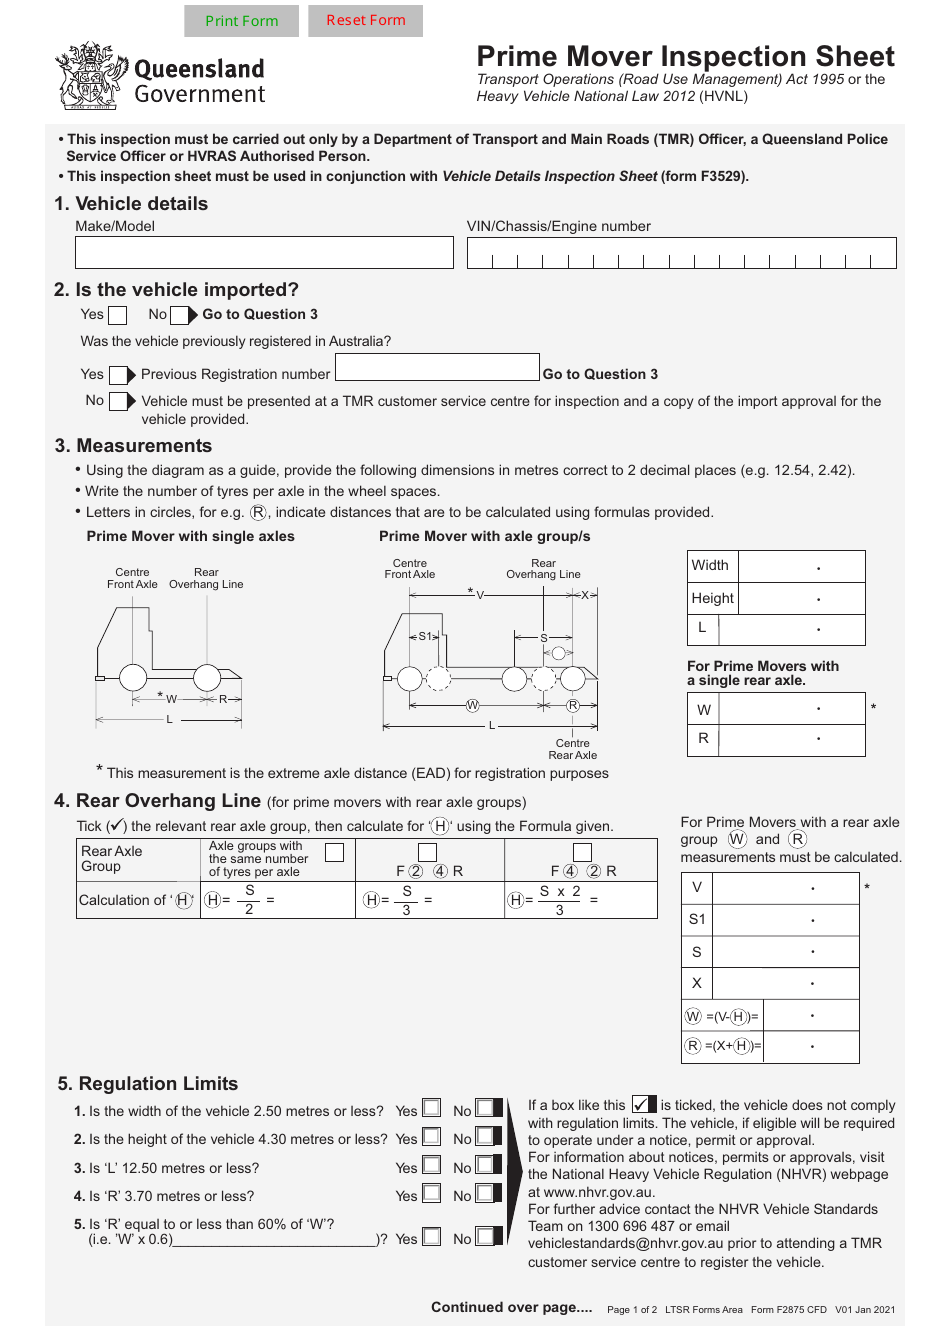 Form F2875 Prime Mover Inspection Sheet - Queensland, Australia, Page 1